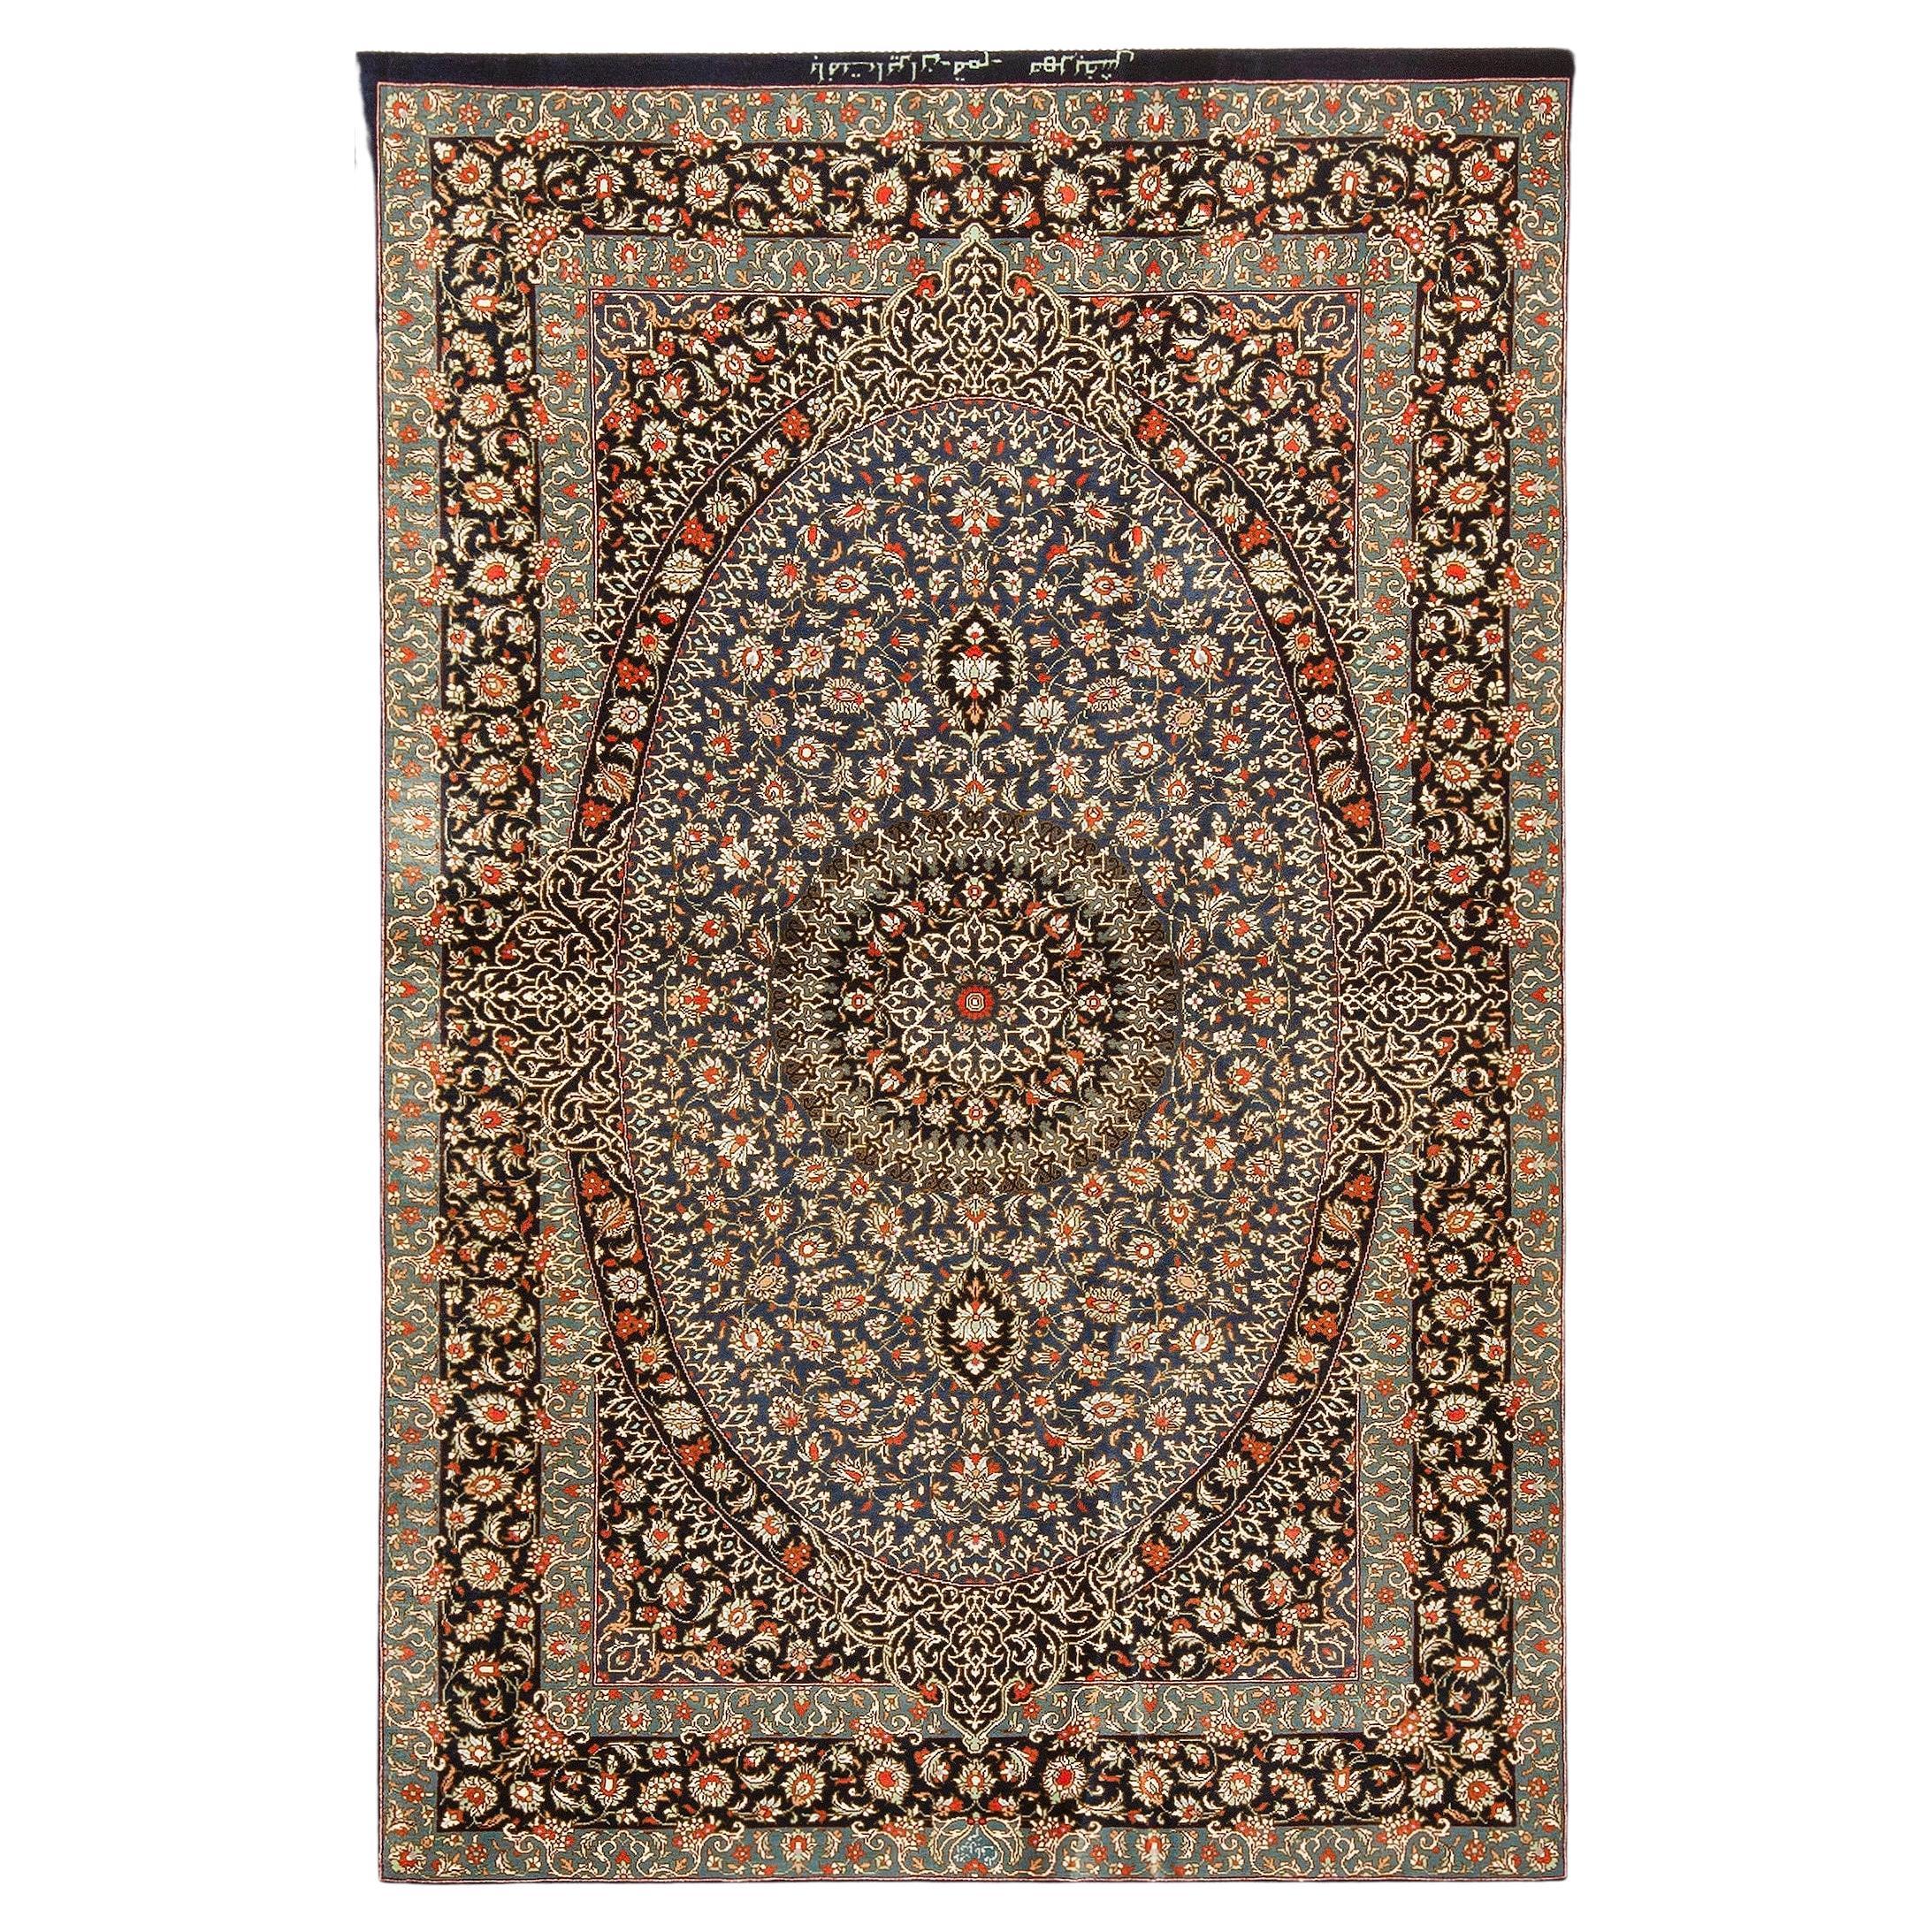 Fine Luxurious Small Scatter Size Vintage Silk Persian Qum Rug 2'8" x 3'10" For Sale